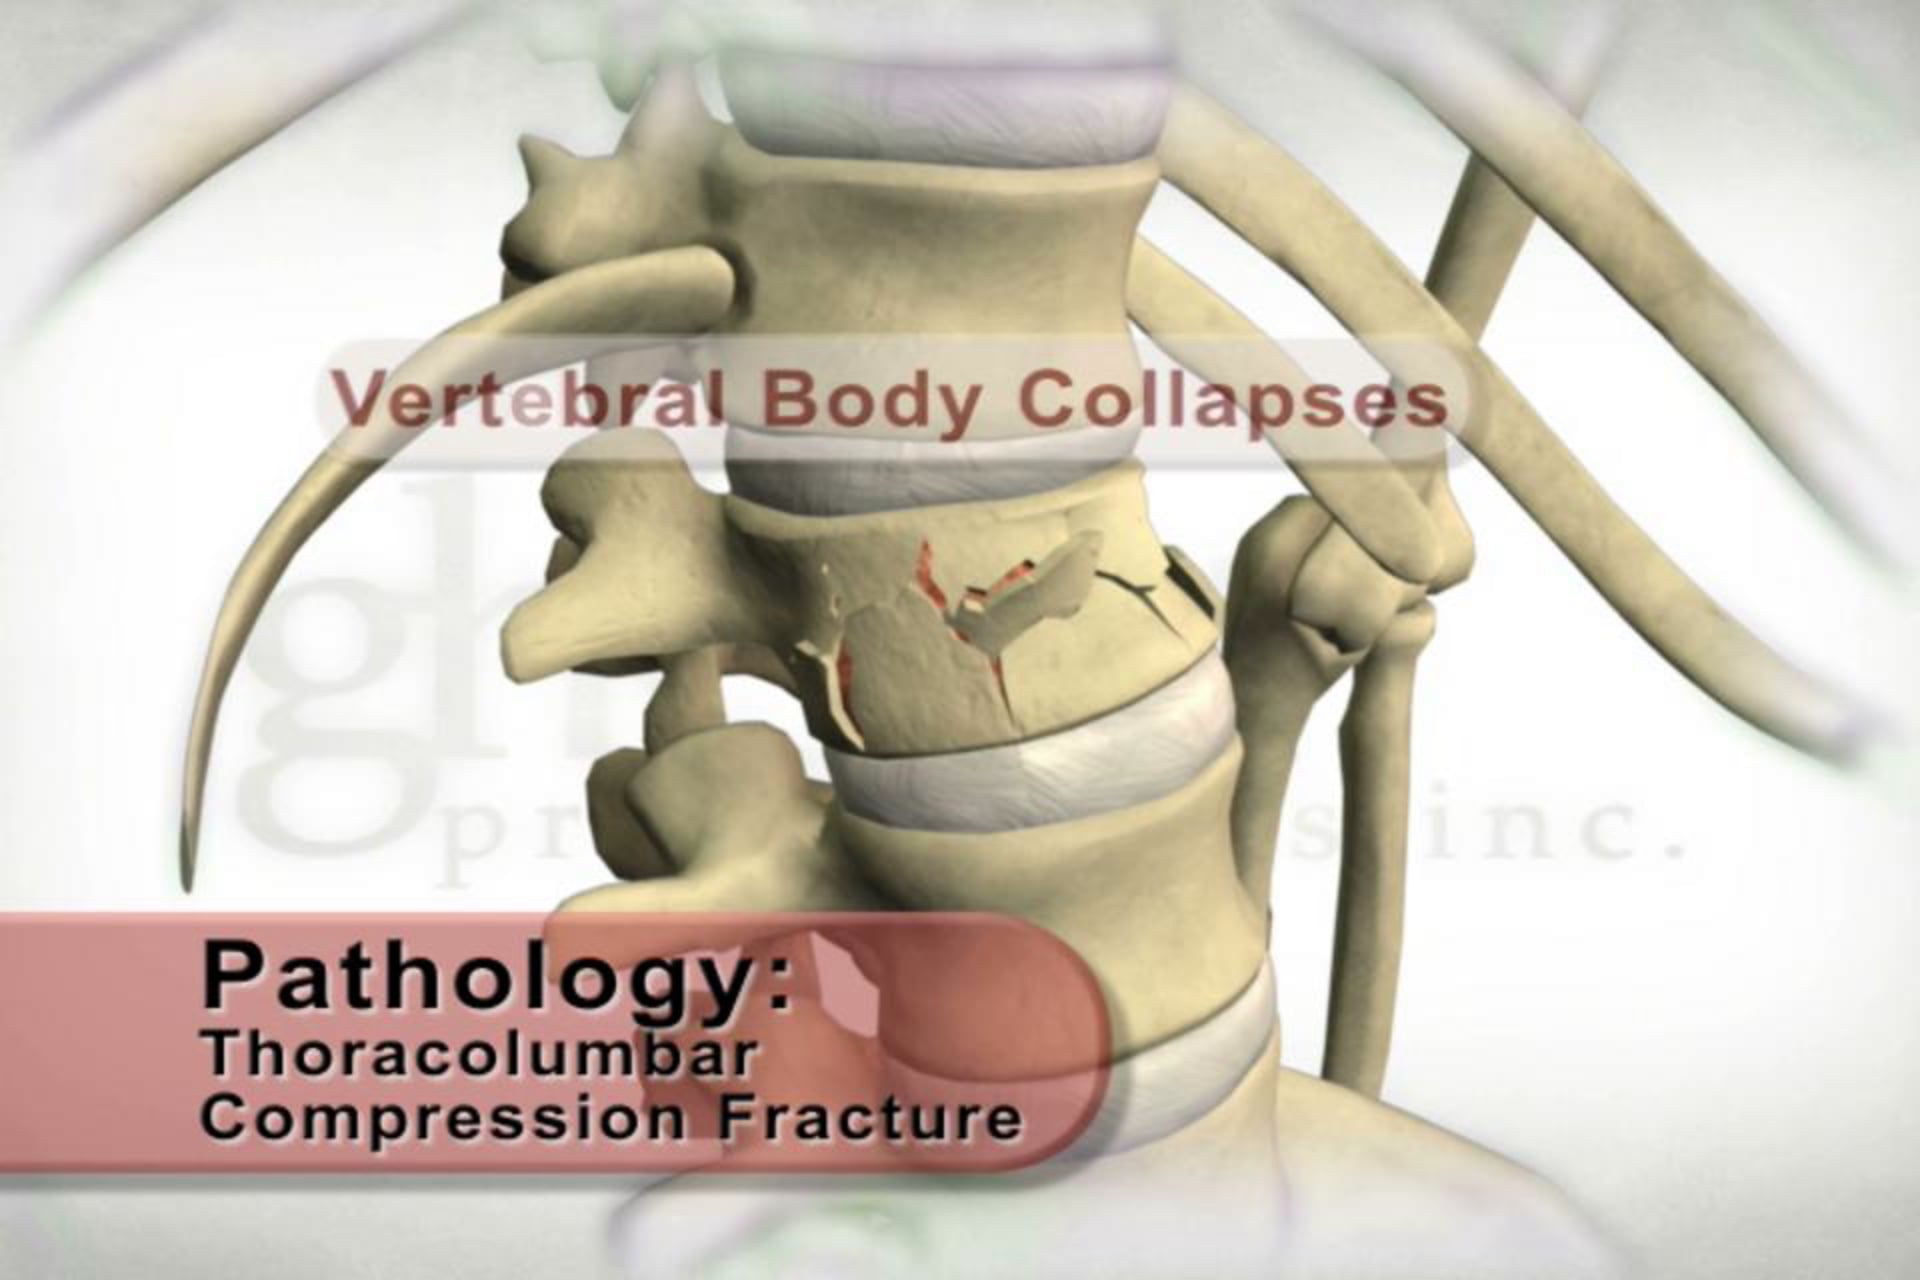 Thoracolumbar Compression Fracture